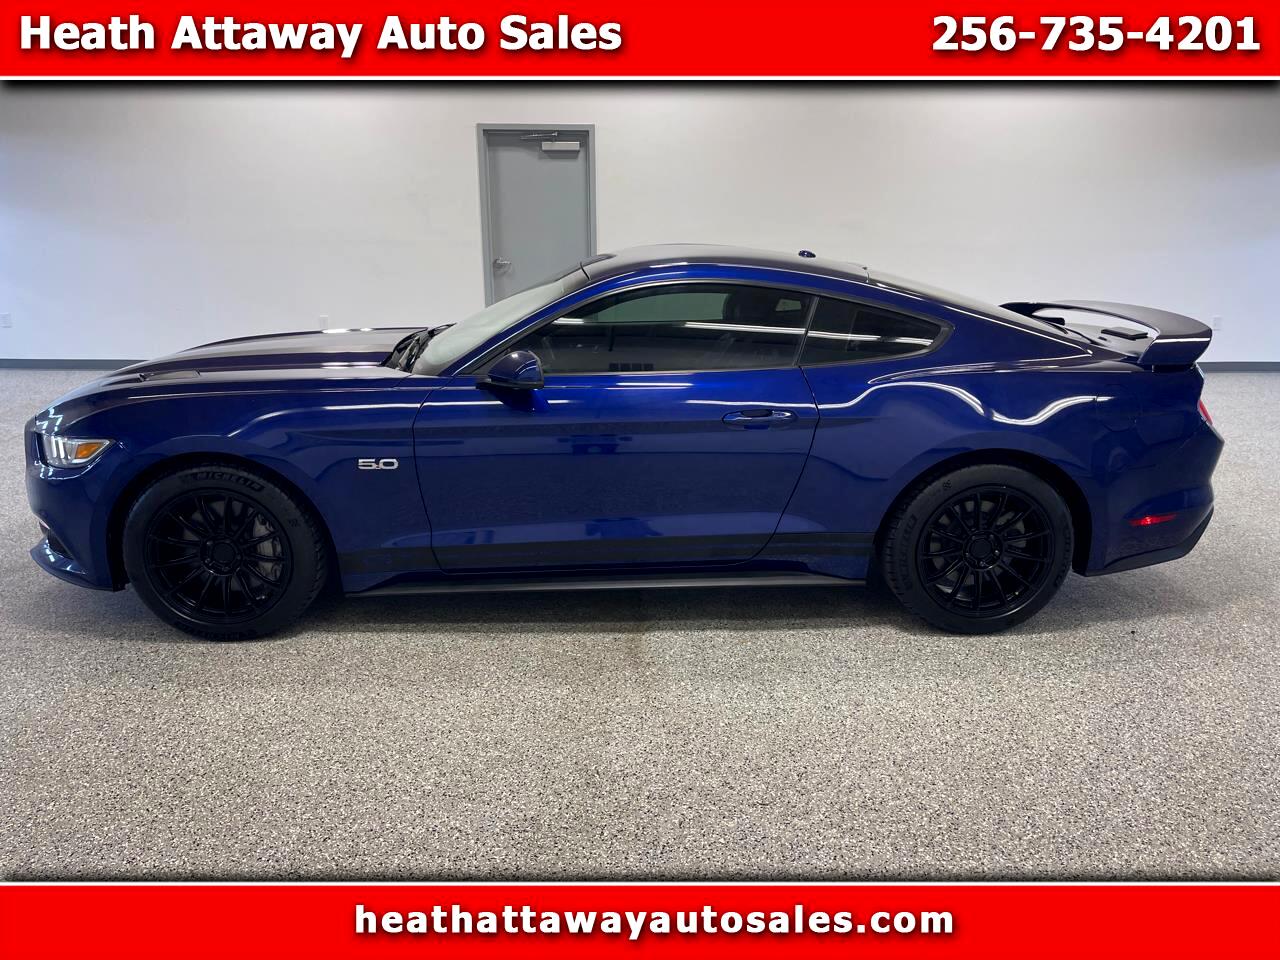 2016 Ford Mustang GT Premium Fastback